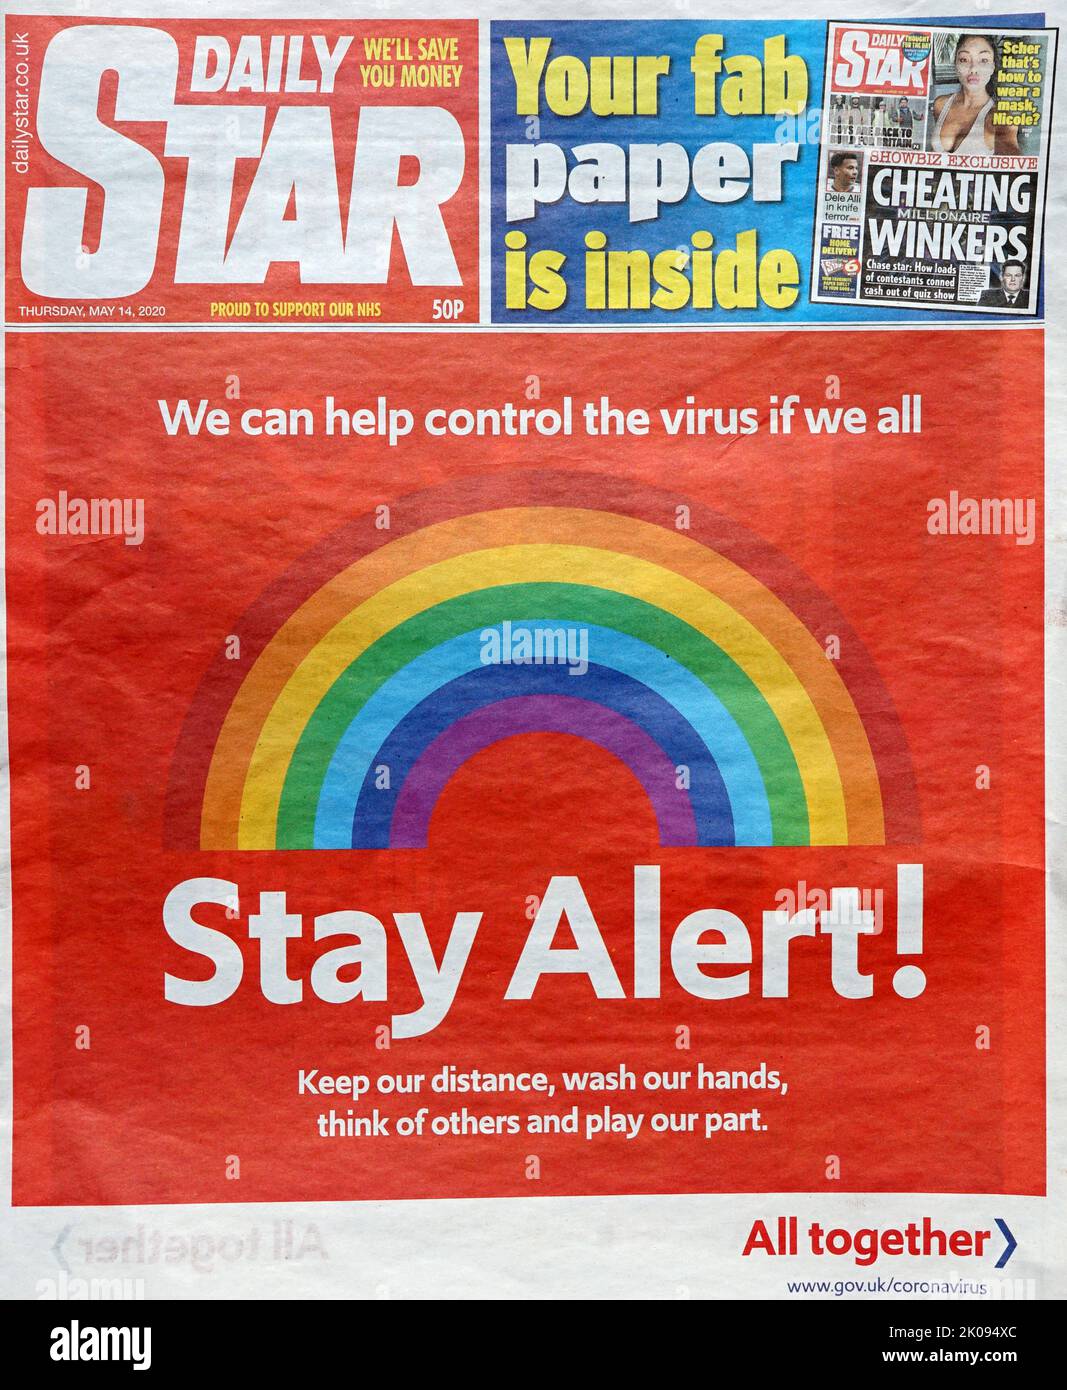 Front cover of The Star newspaper, May 14 2020, with warning of the Covid-19 Pandemic. Stock Photo